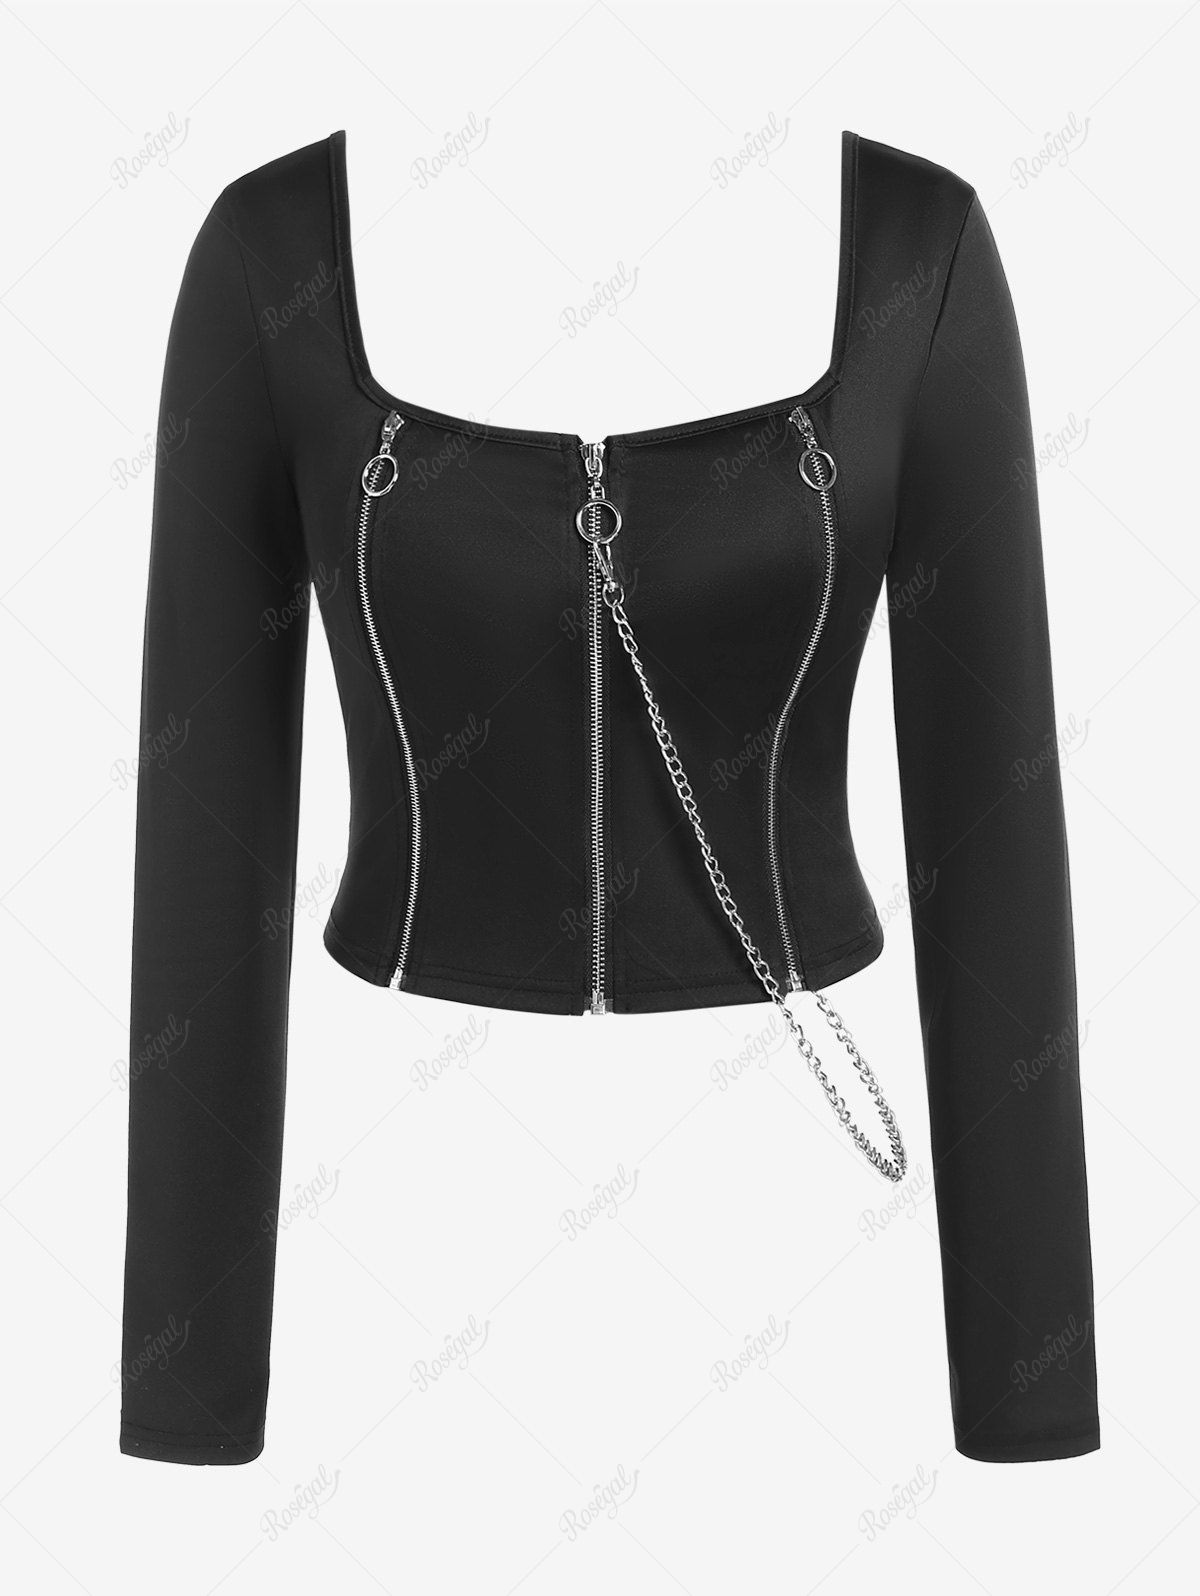 Fancy Gothic Square Collar Zip Rings Top  